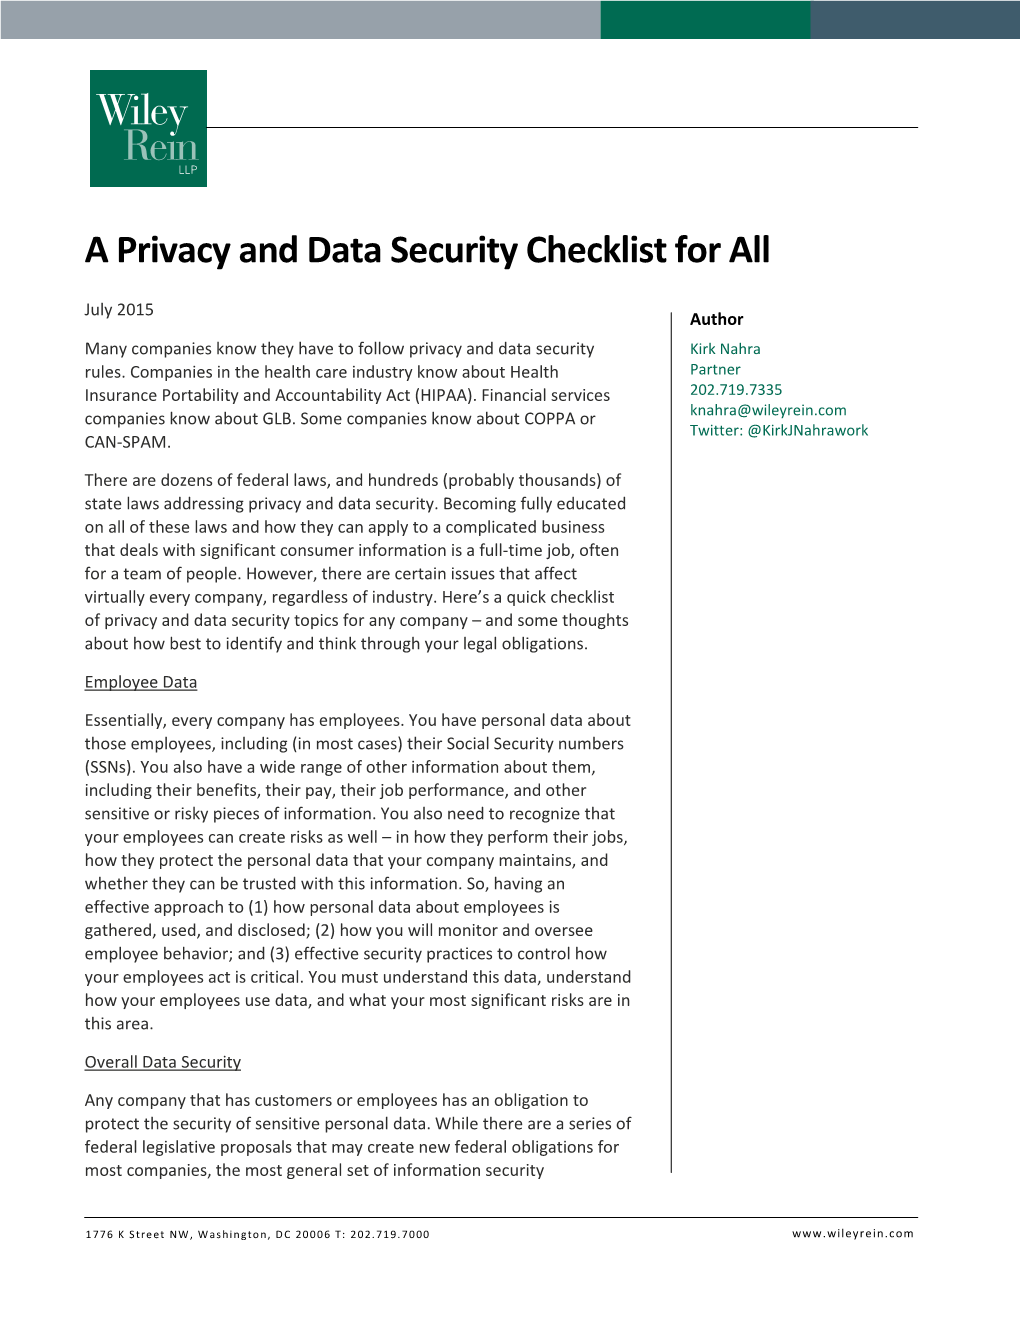 A Privacy and Data Security Checklist for All.Pdf